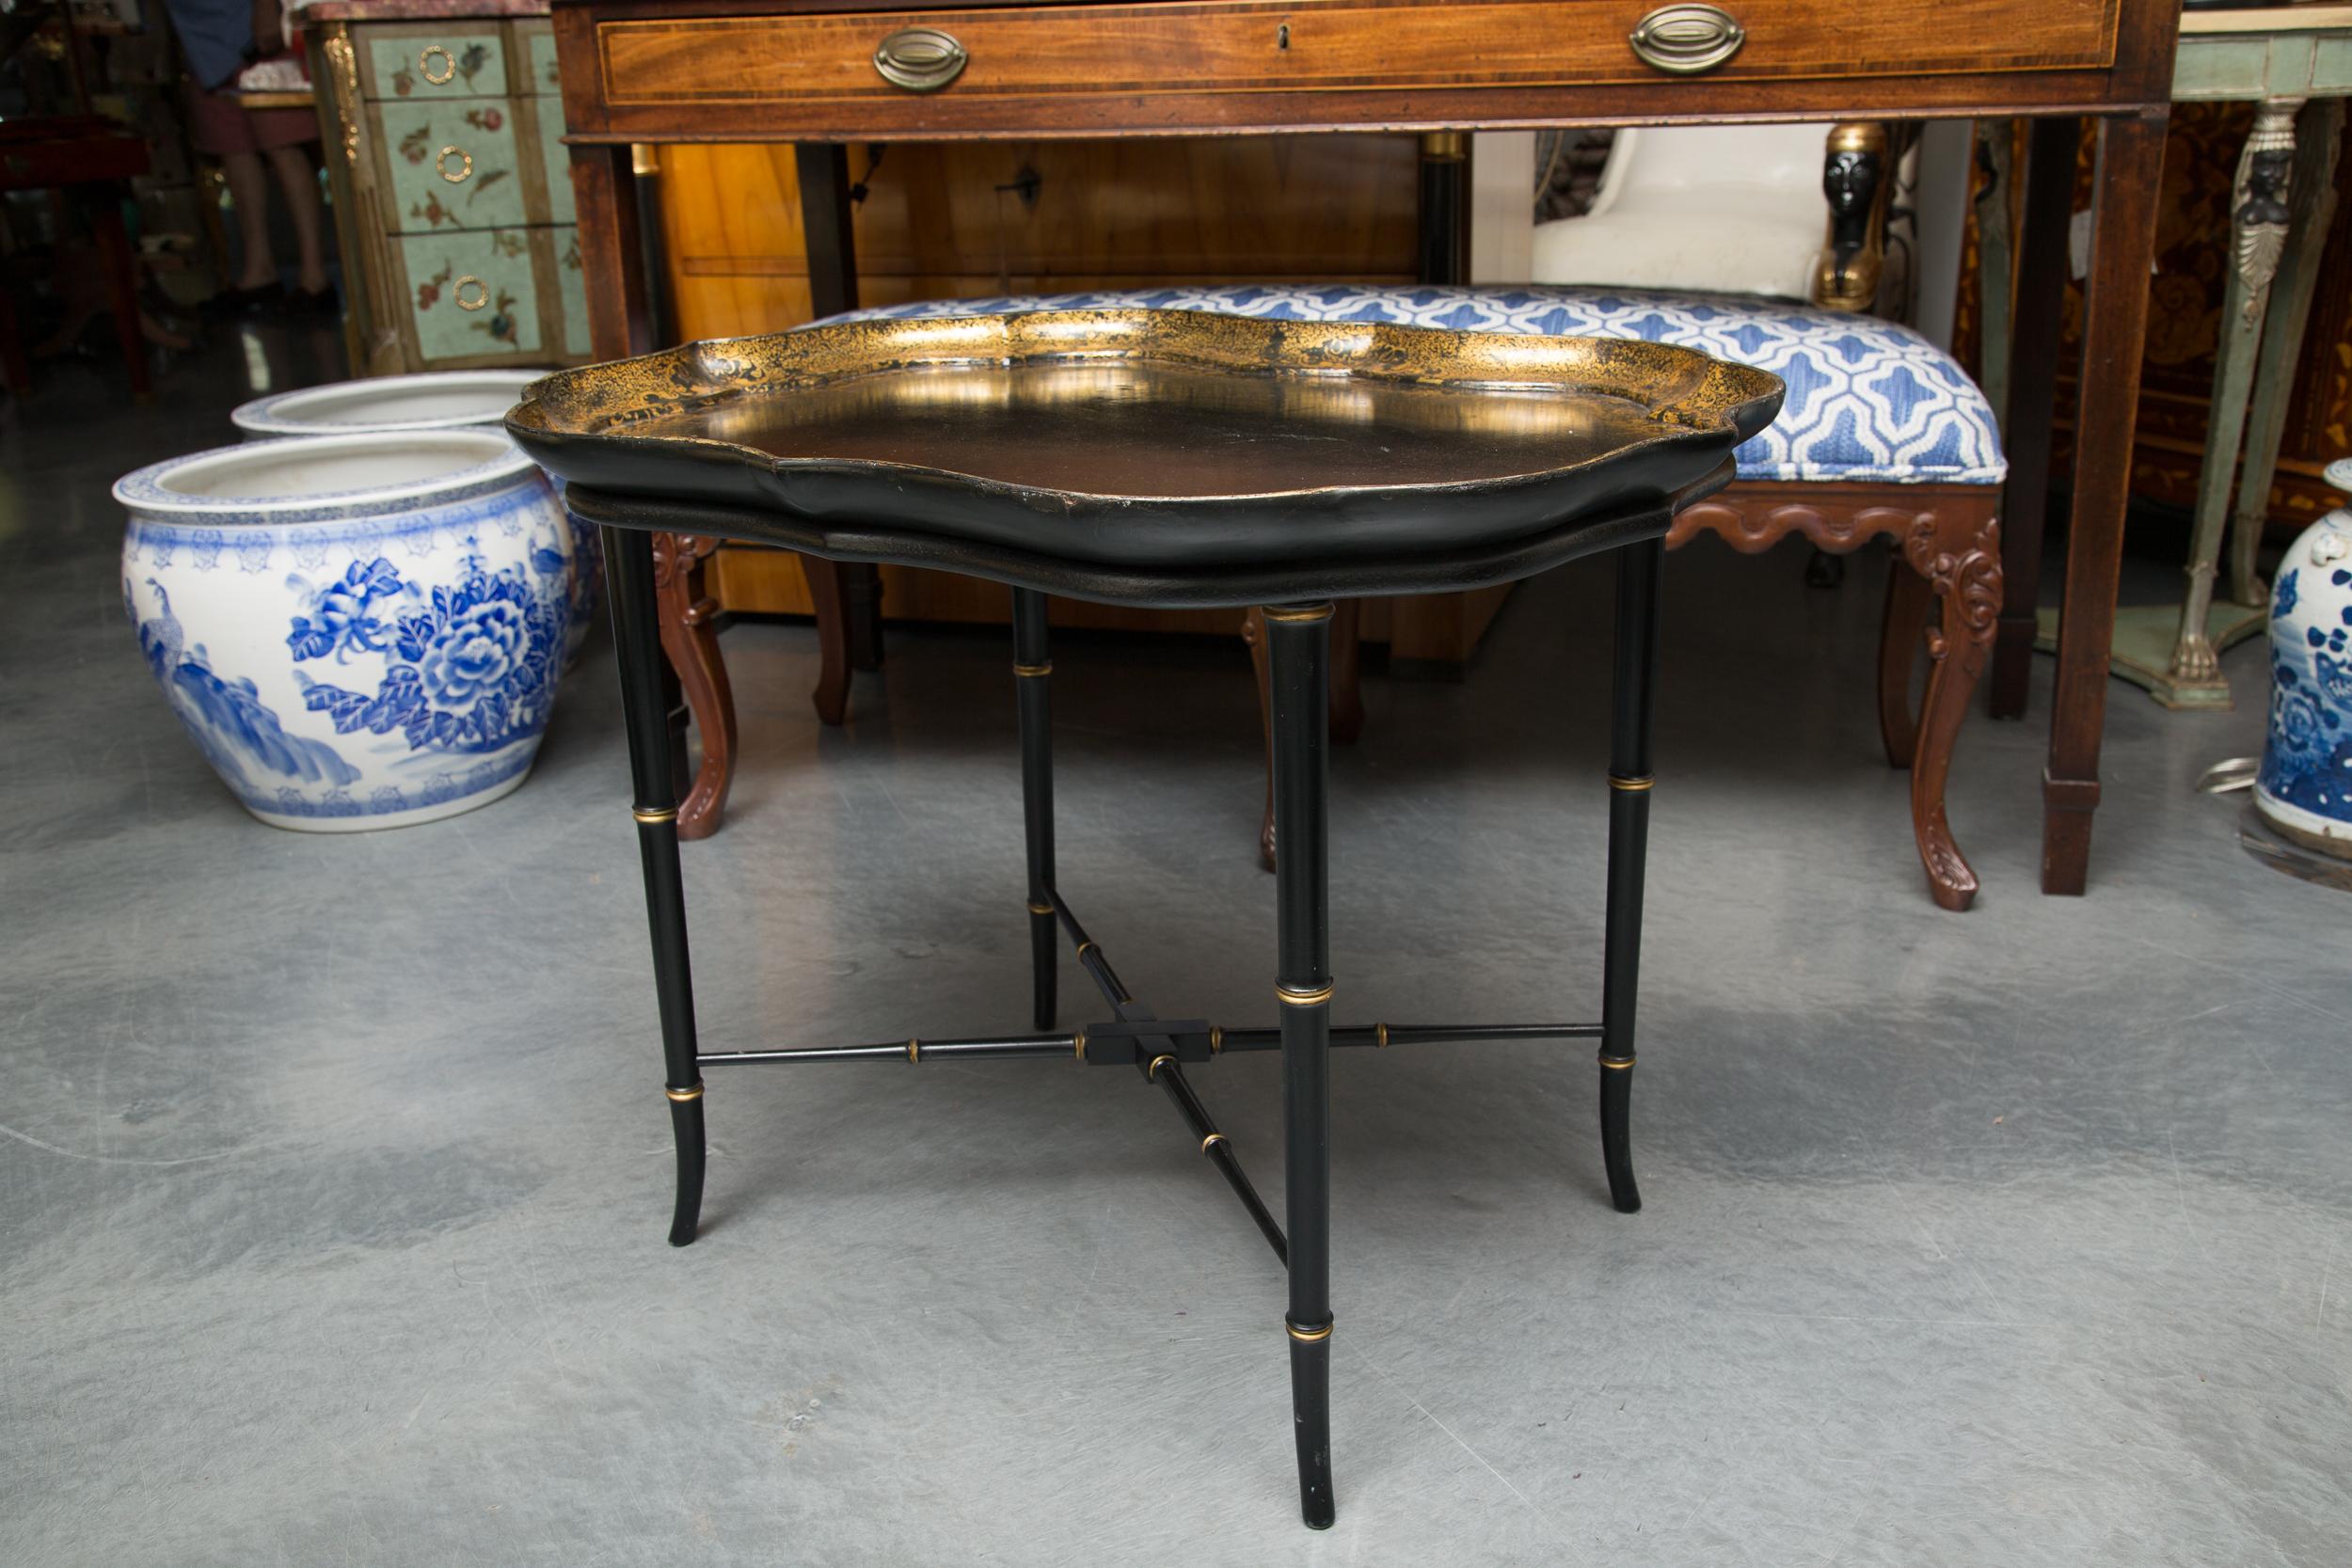 This is a Classic black English Victorian papier mâché tray with an interior gilt border. The tray is fitted to a latter ebonized faux bamboo stand, circa 1860 (tray).